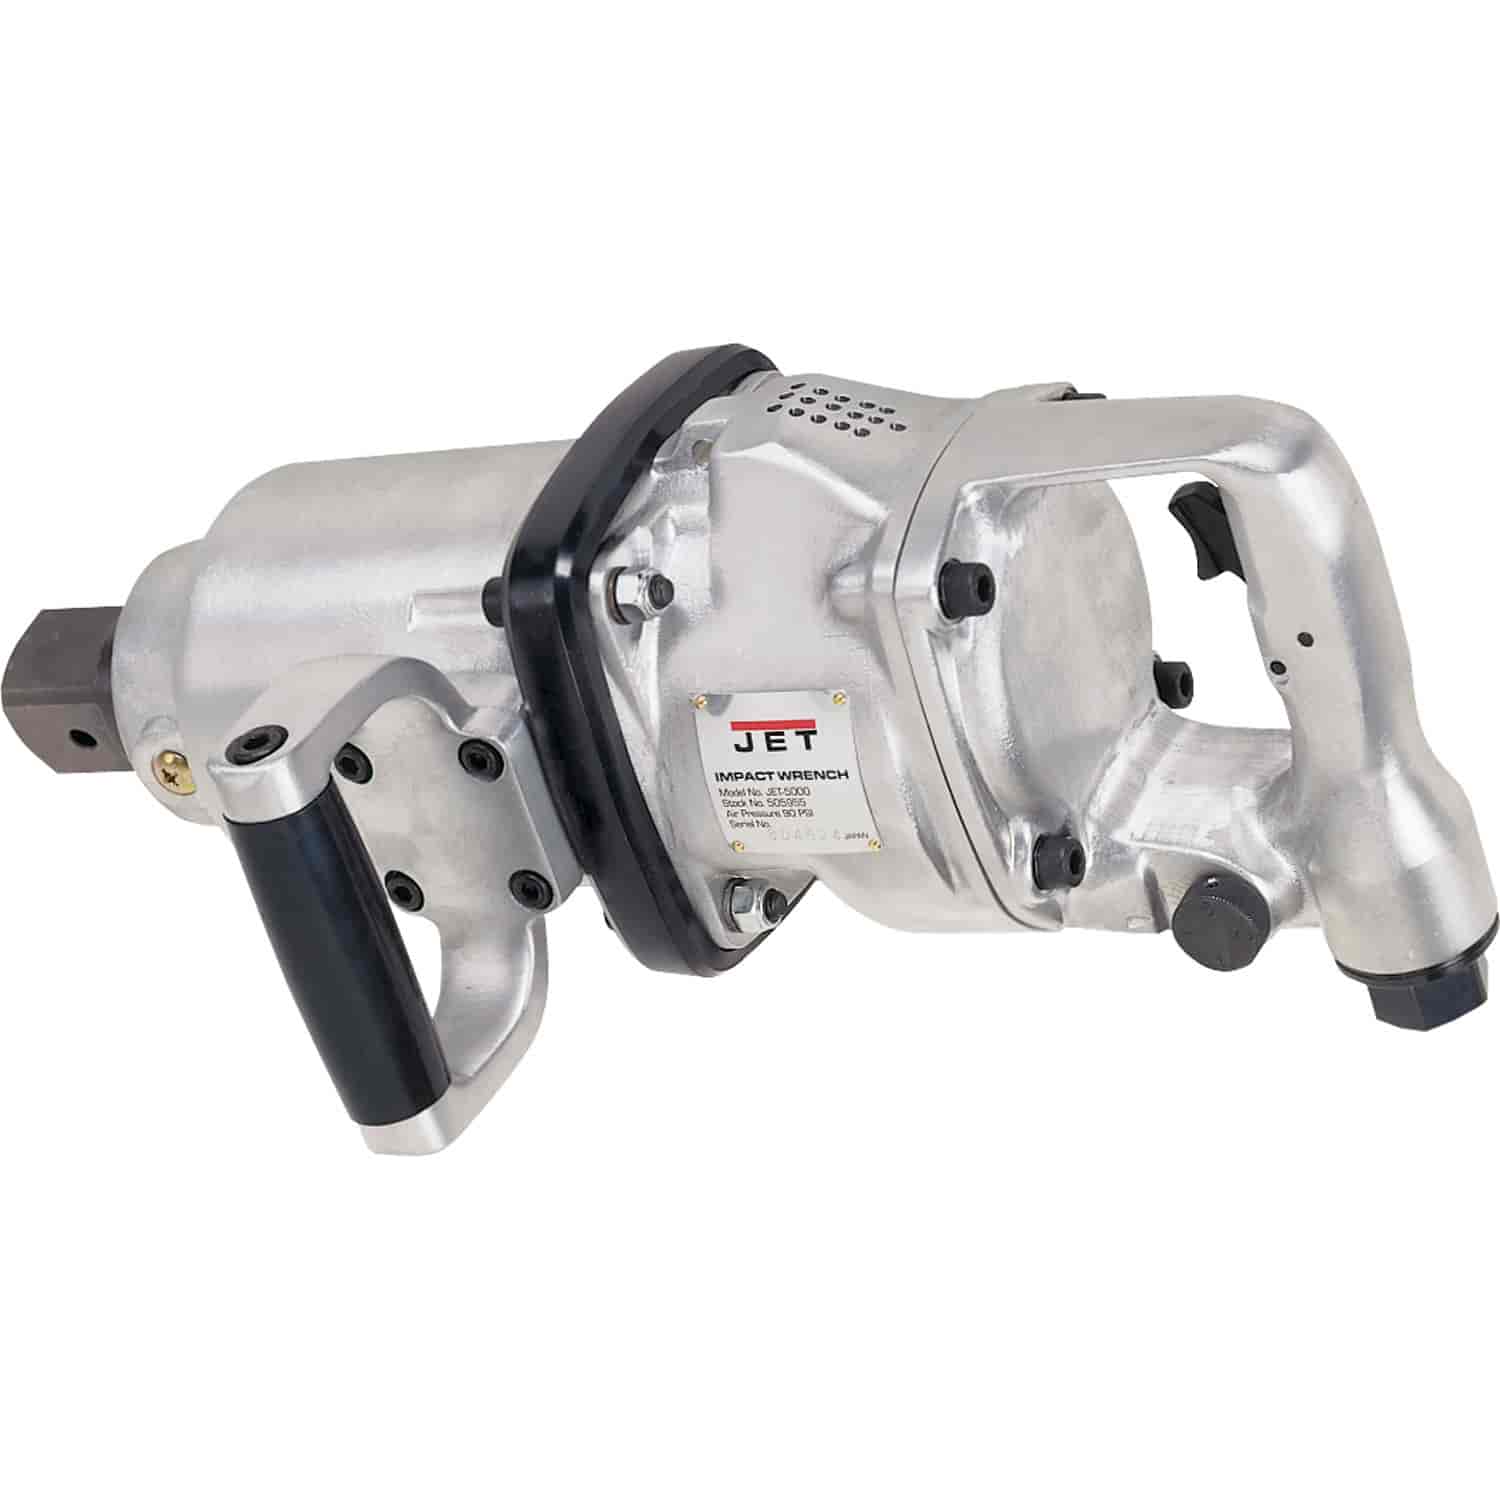 1-1/2" Industrial Air Impact Wrench D-Handle Square Drive: 1-1/2"